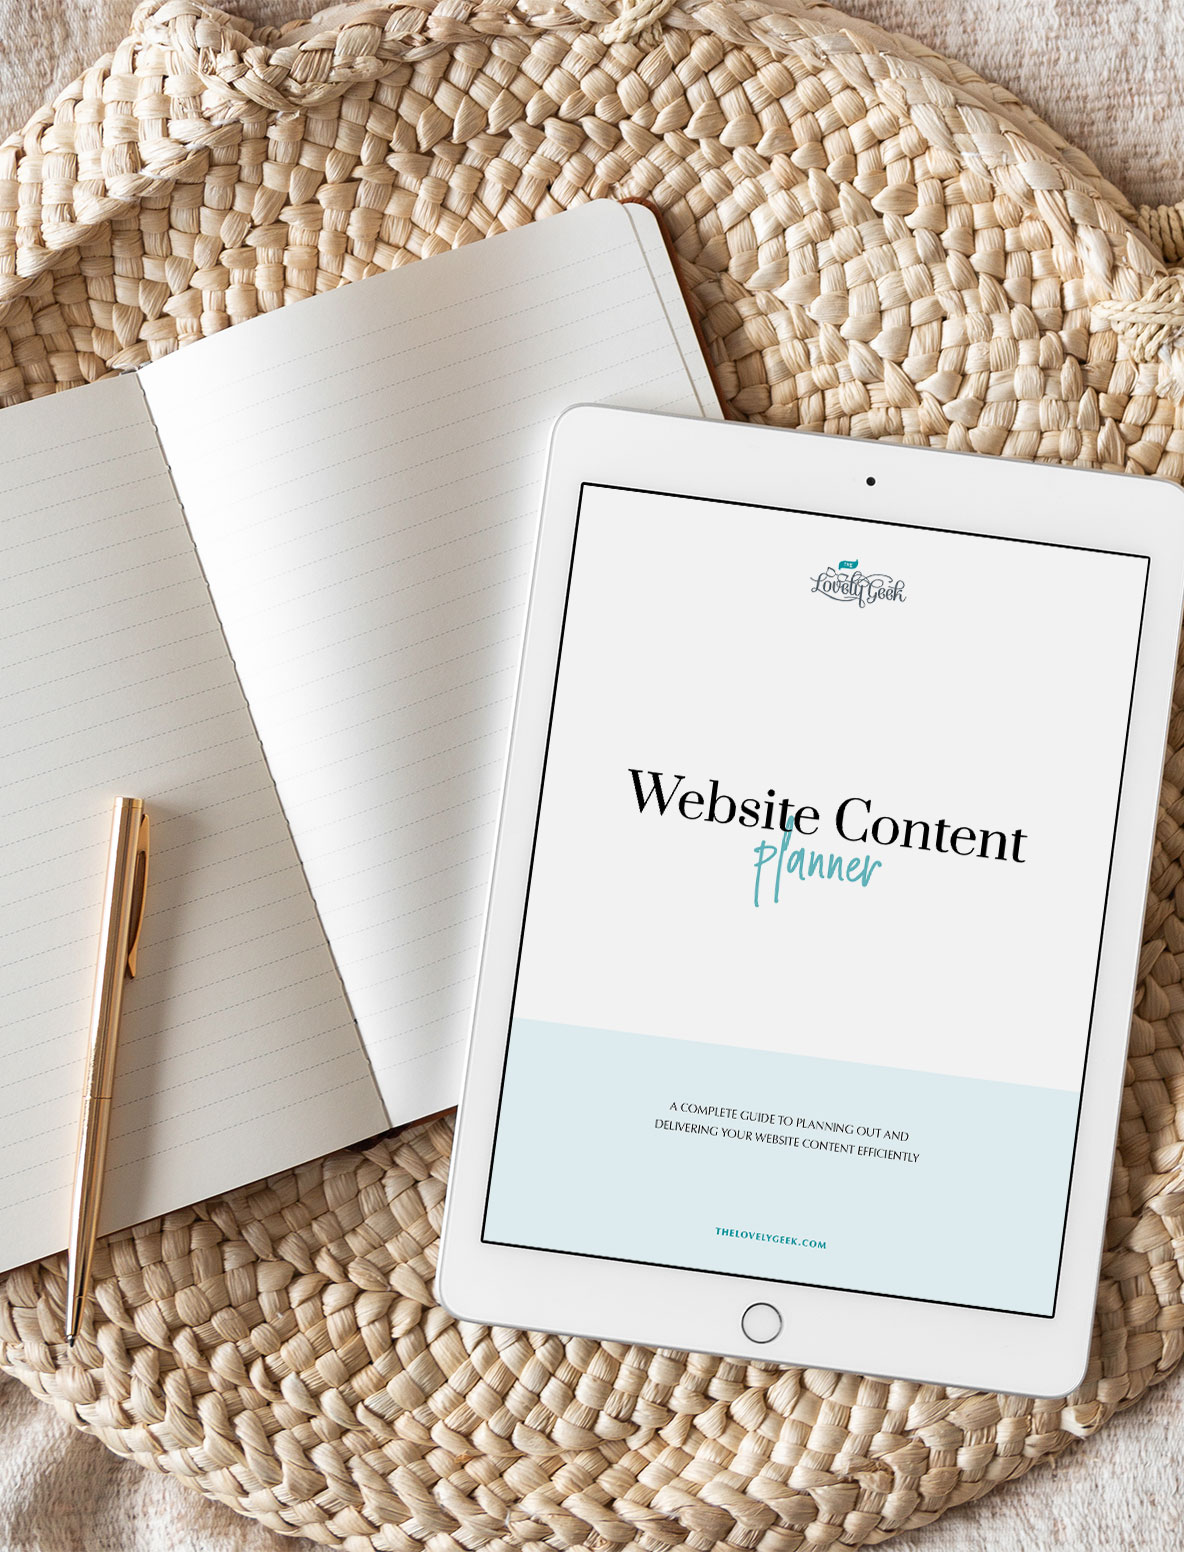 How to Create a Content Guide for Clients